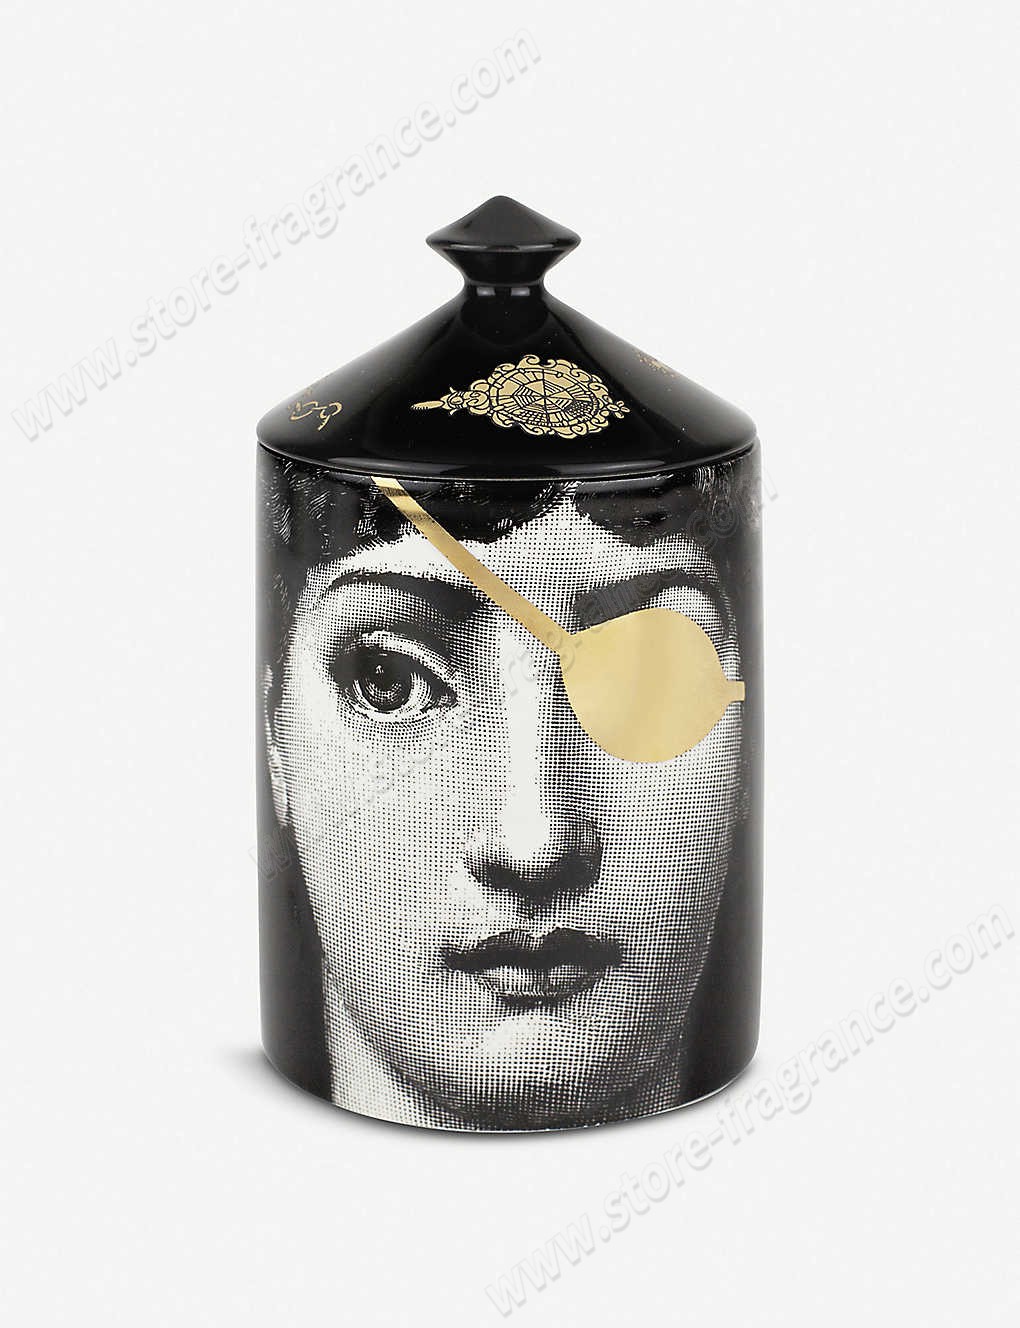 FORNASETTI/L'Eclaireuse scented candle 300g ✿ Discount Store - FORNASETTI/L'Eclaireuse scented candle 300g ✿ Discount Store